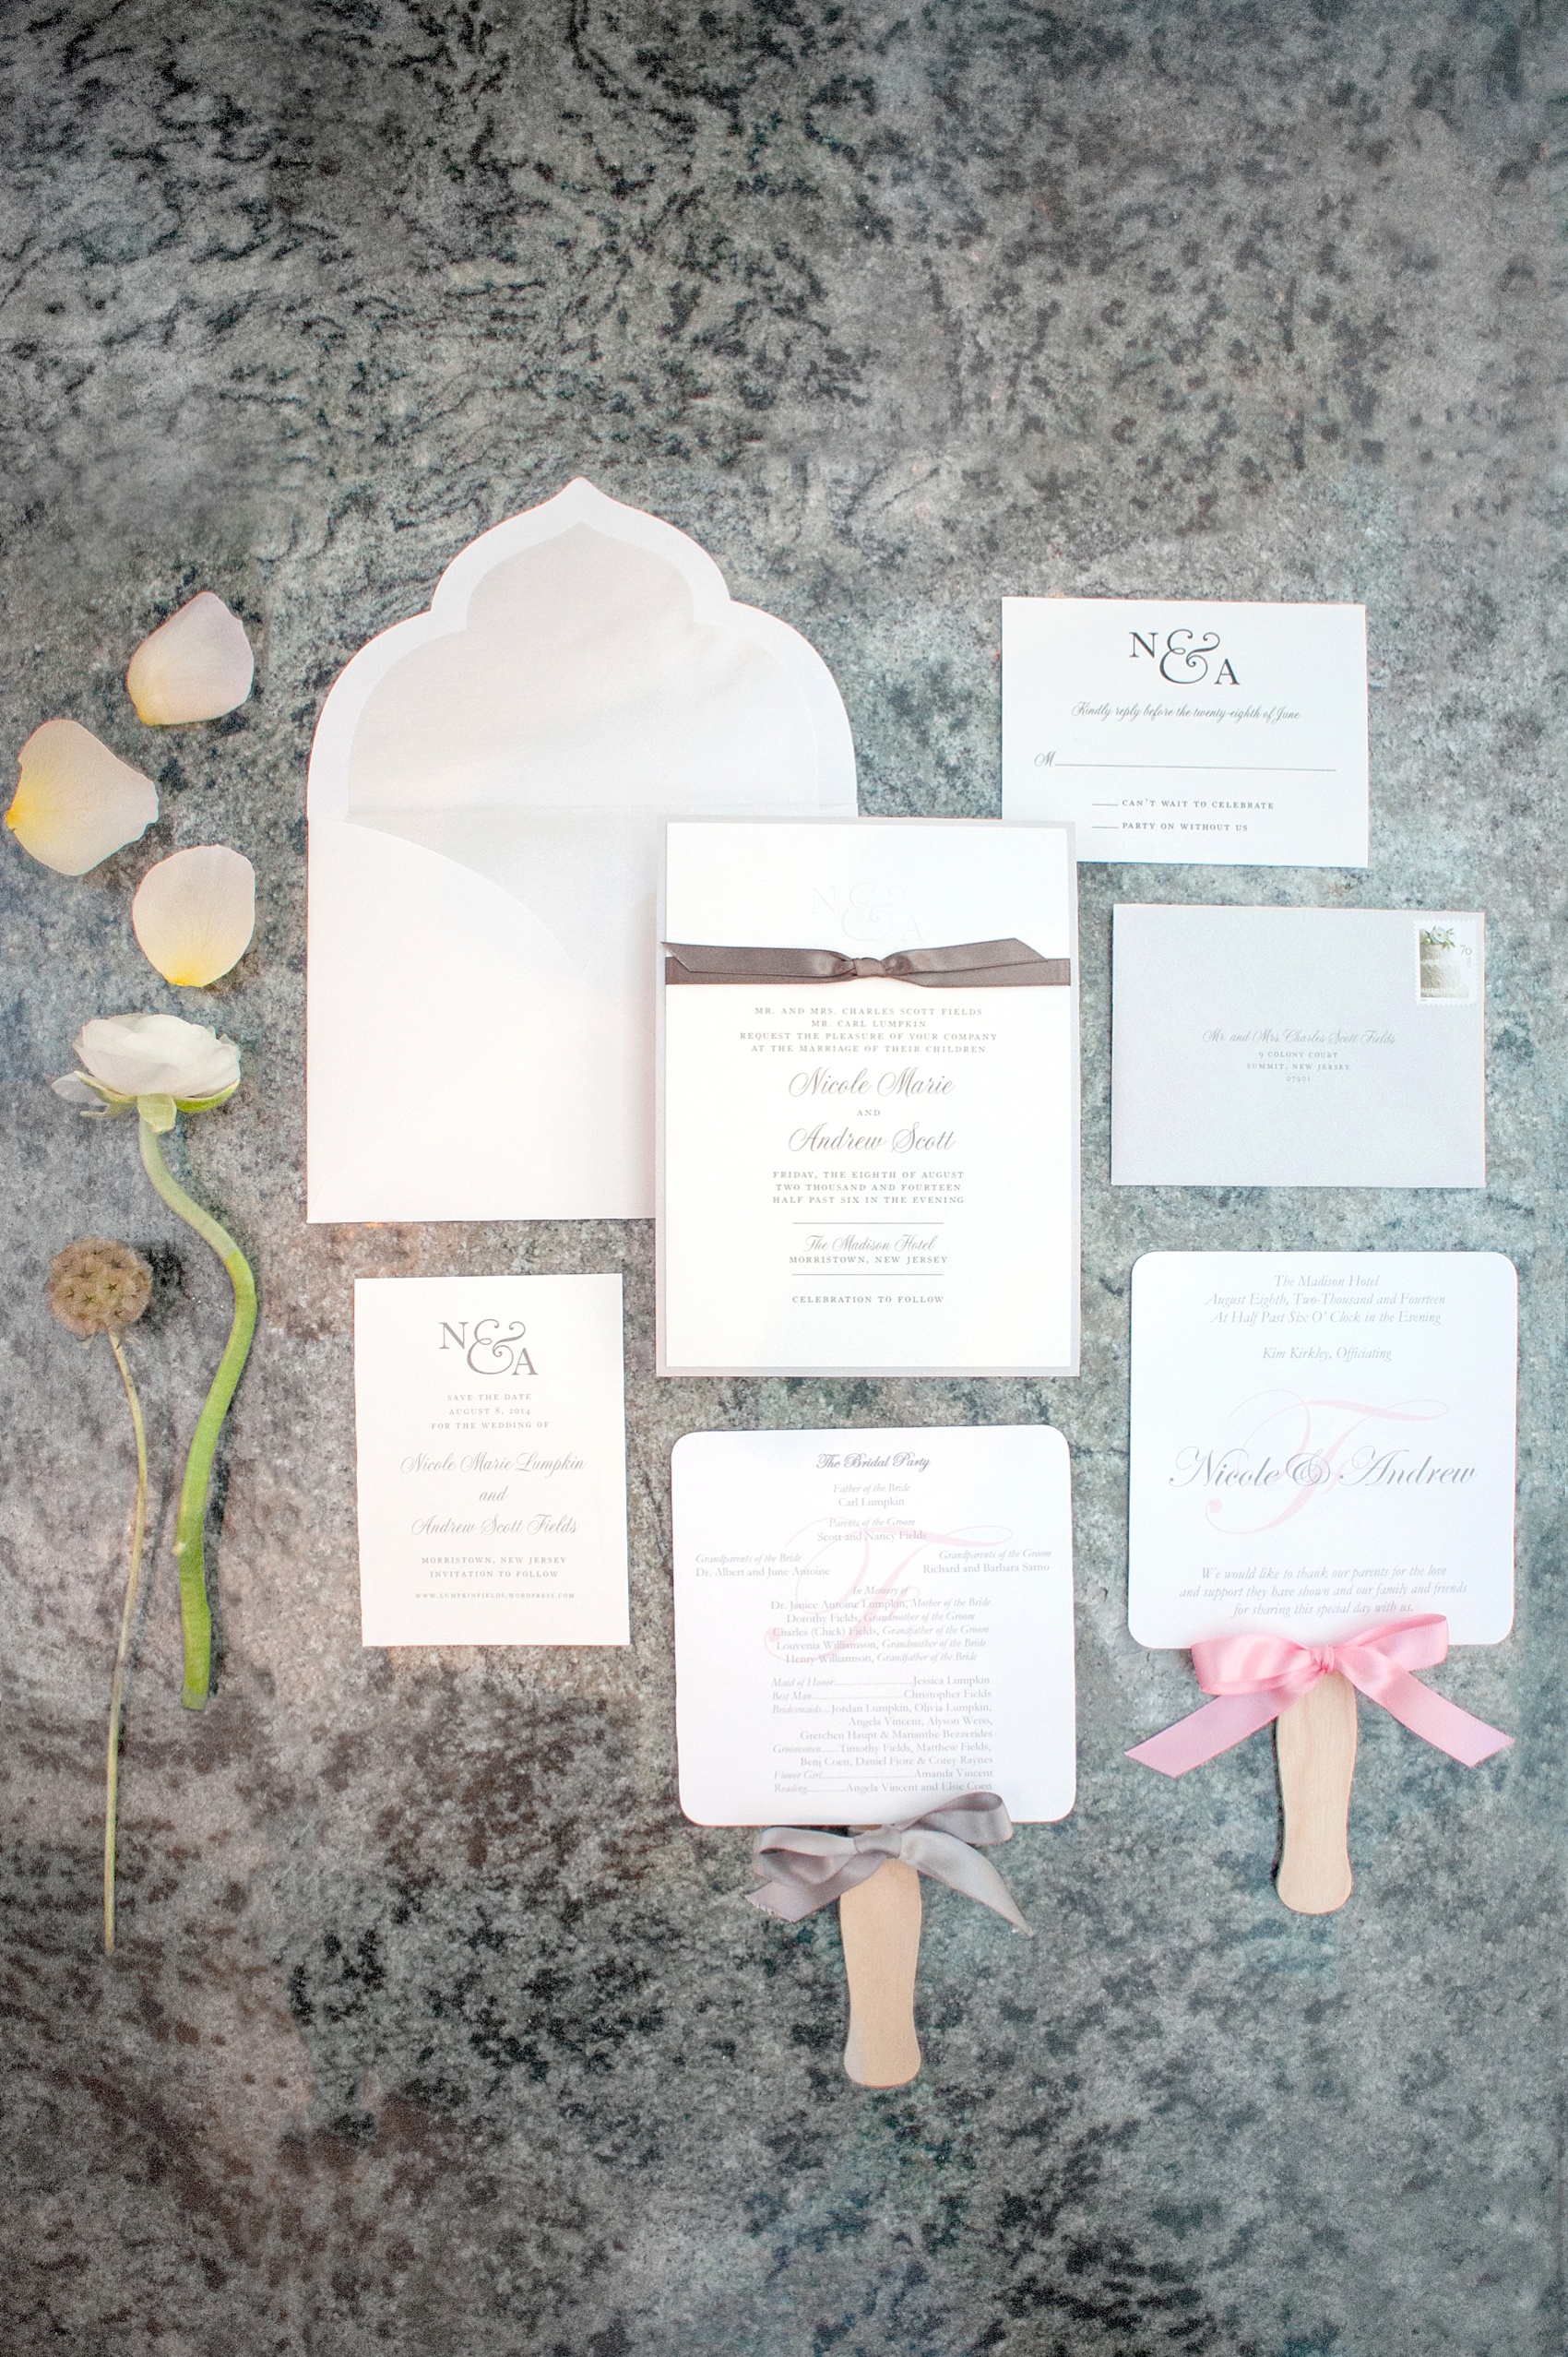 Classic white wedding invitation suite. Photos by Mikkel Paige Photography at The Conservatory at the Madison Hotel, New Jersey.